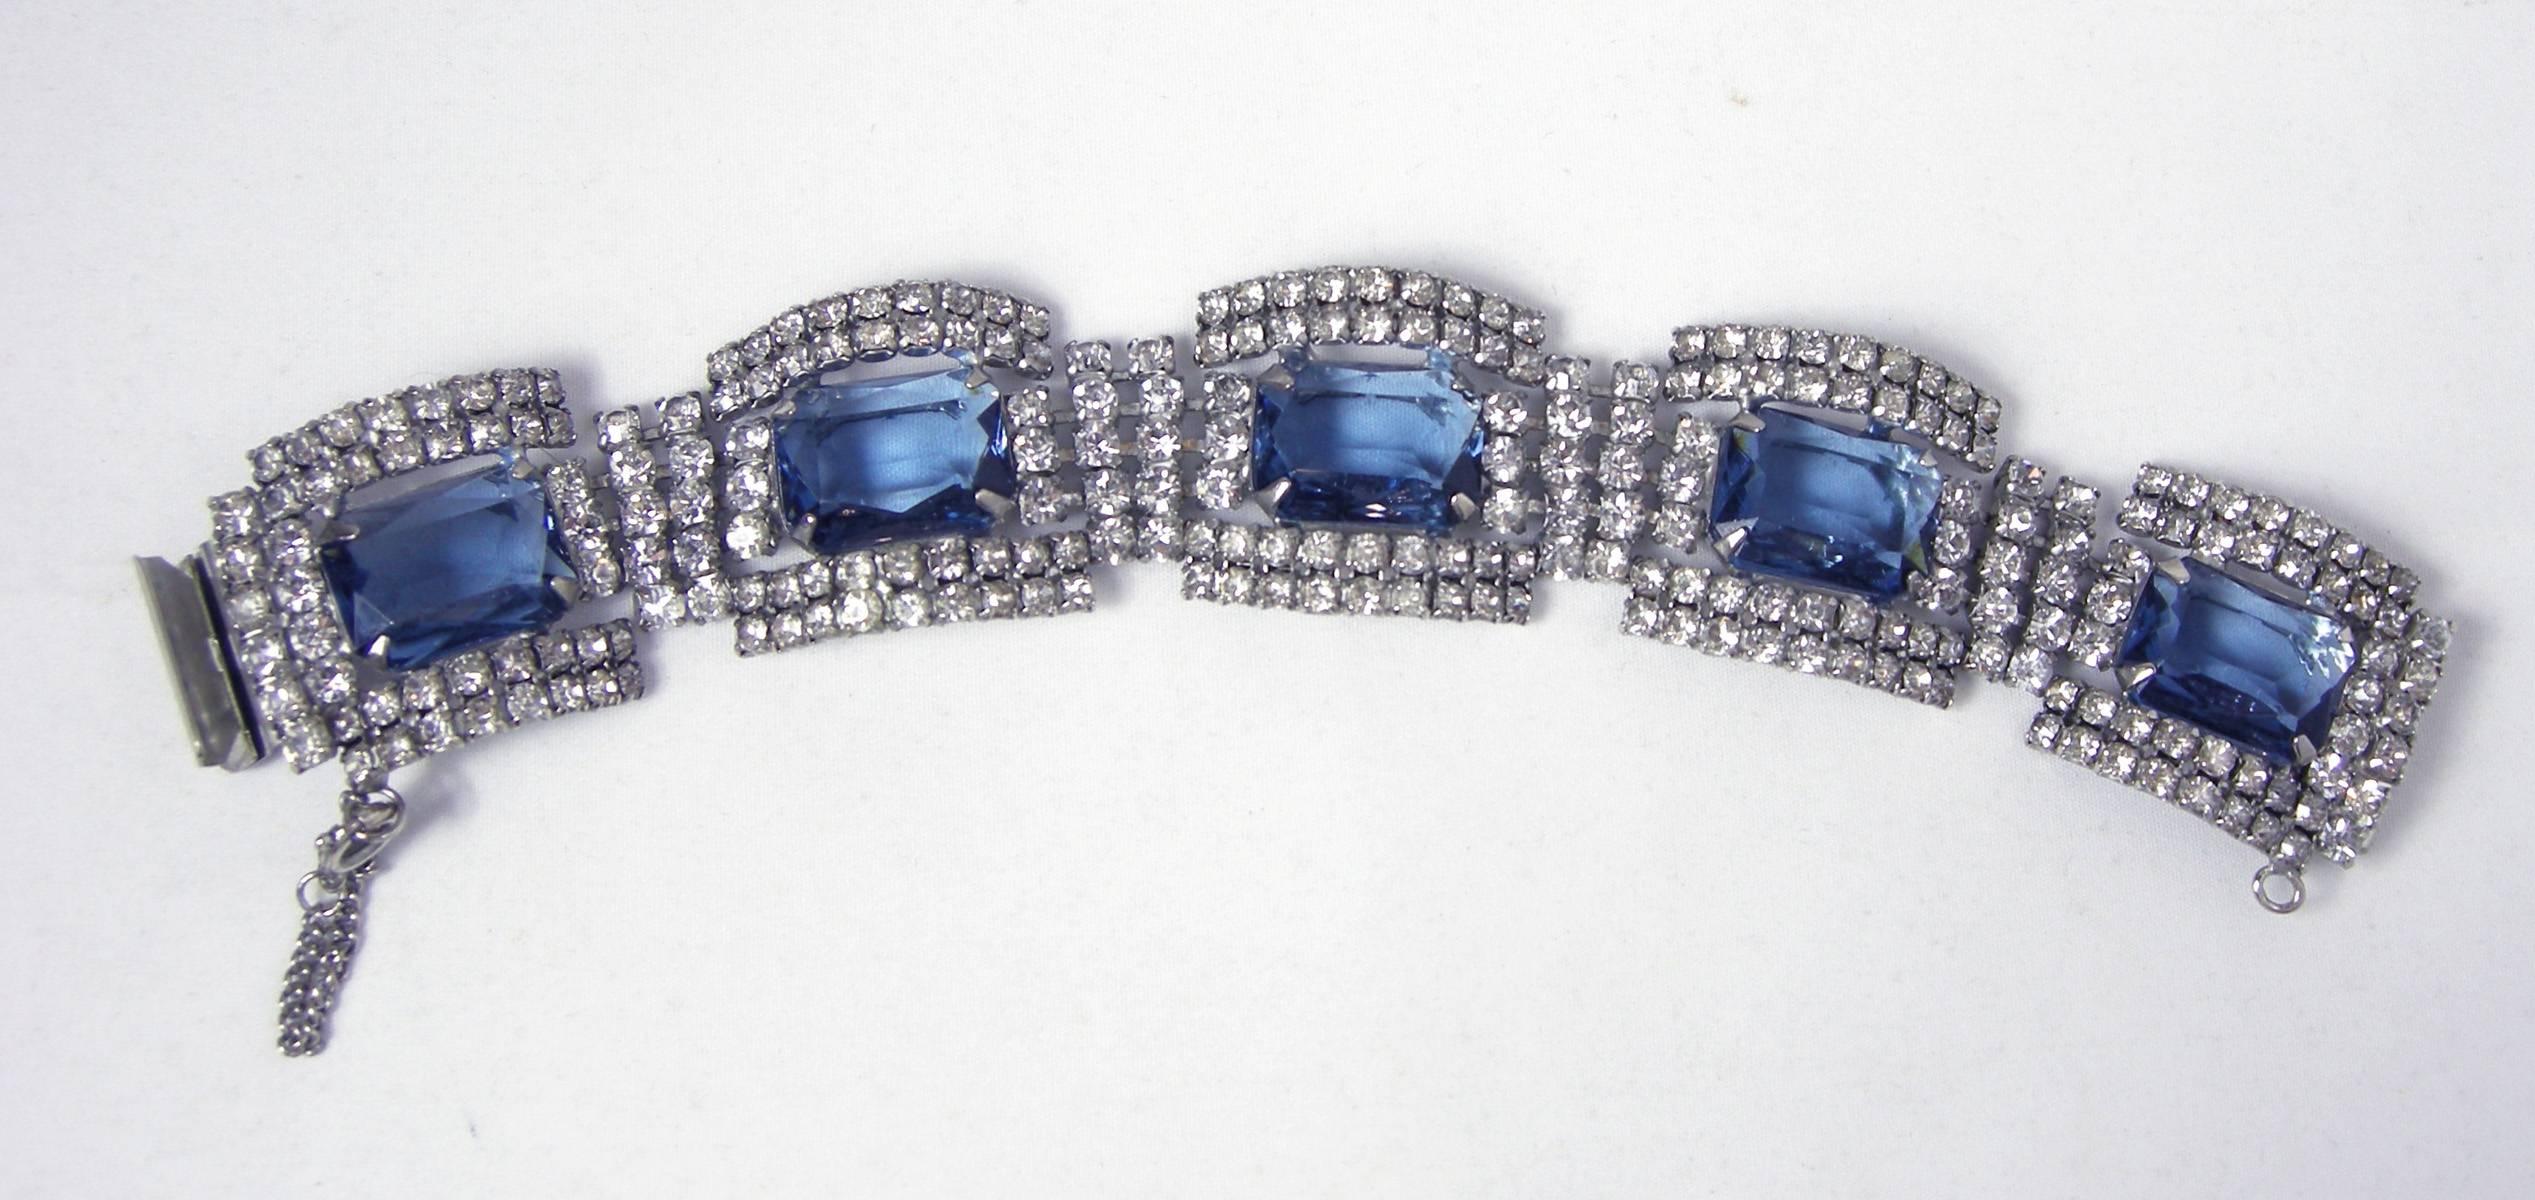 This stunning Deco bracelet features five large sized faux blue sapphire rhinestones surrounded by clear rhinestones in a silver tone setting. The bracelet measures 7-1/2” x 1-1/4”. It has a slide in clasp and is in excellent condition.